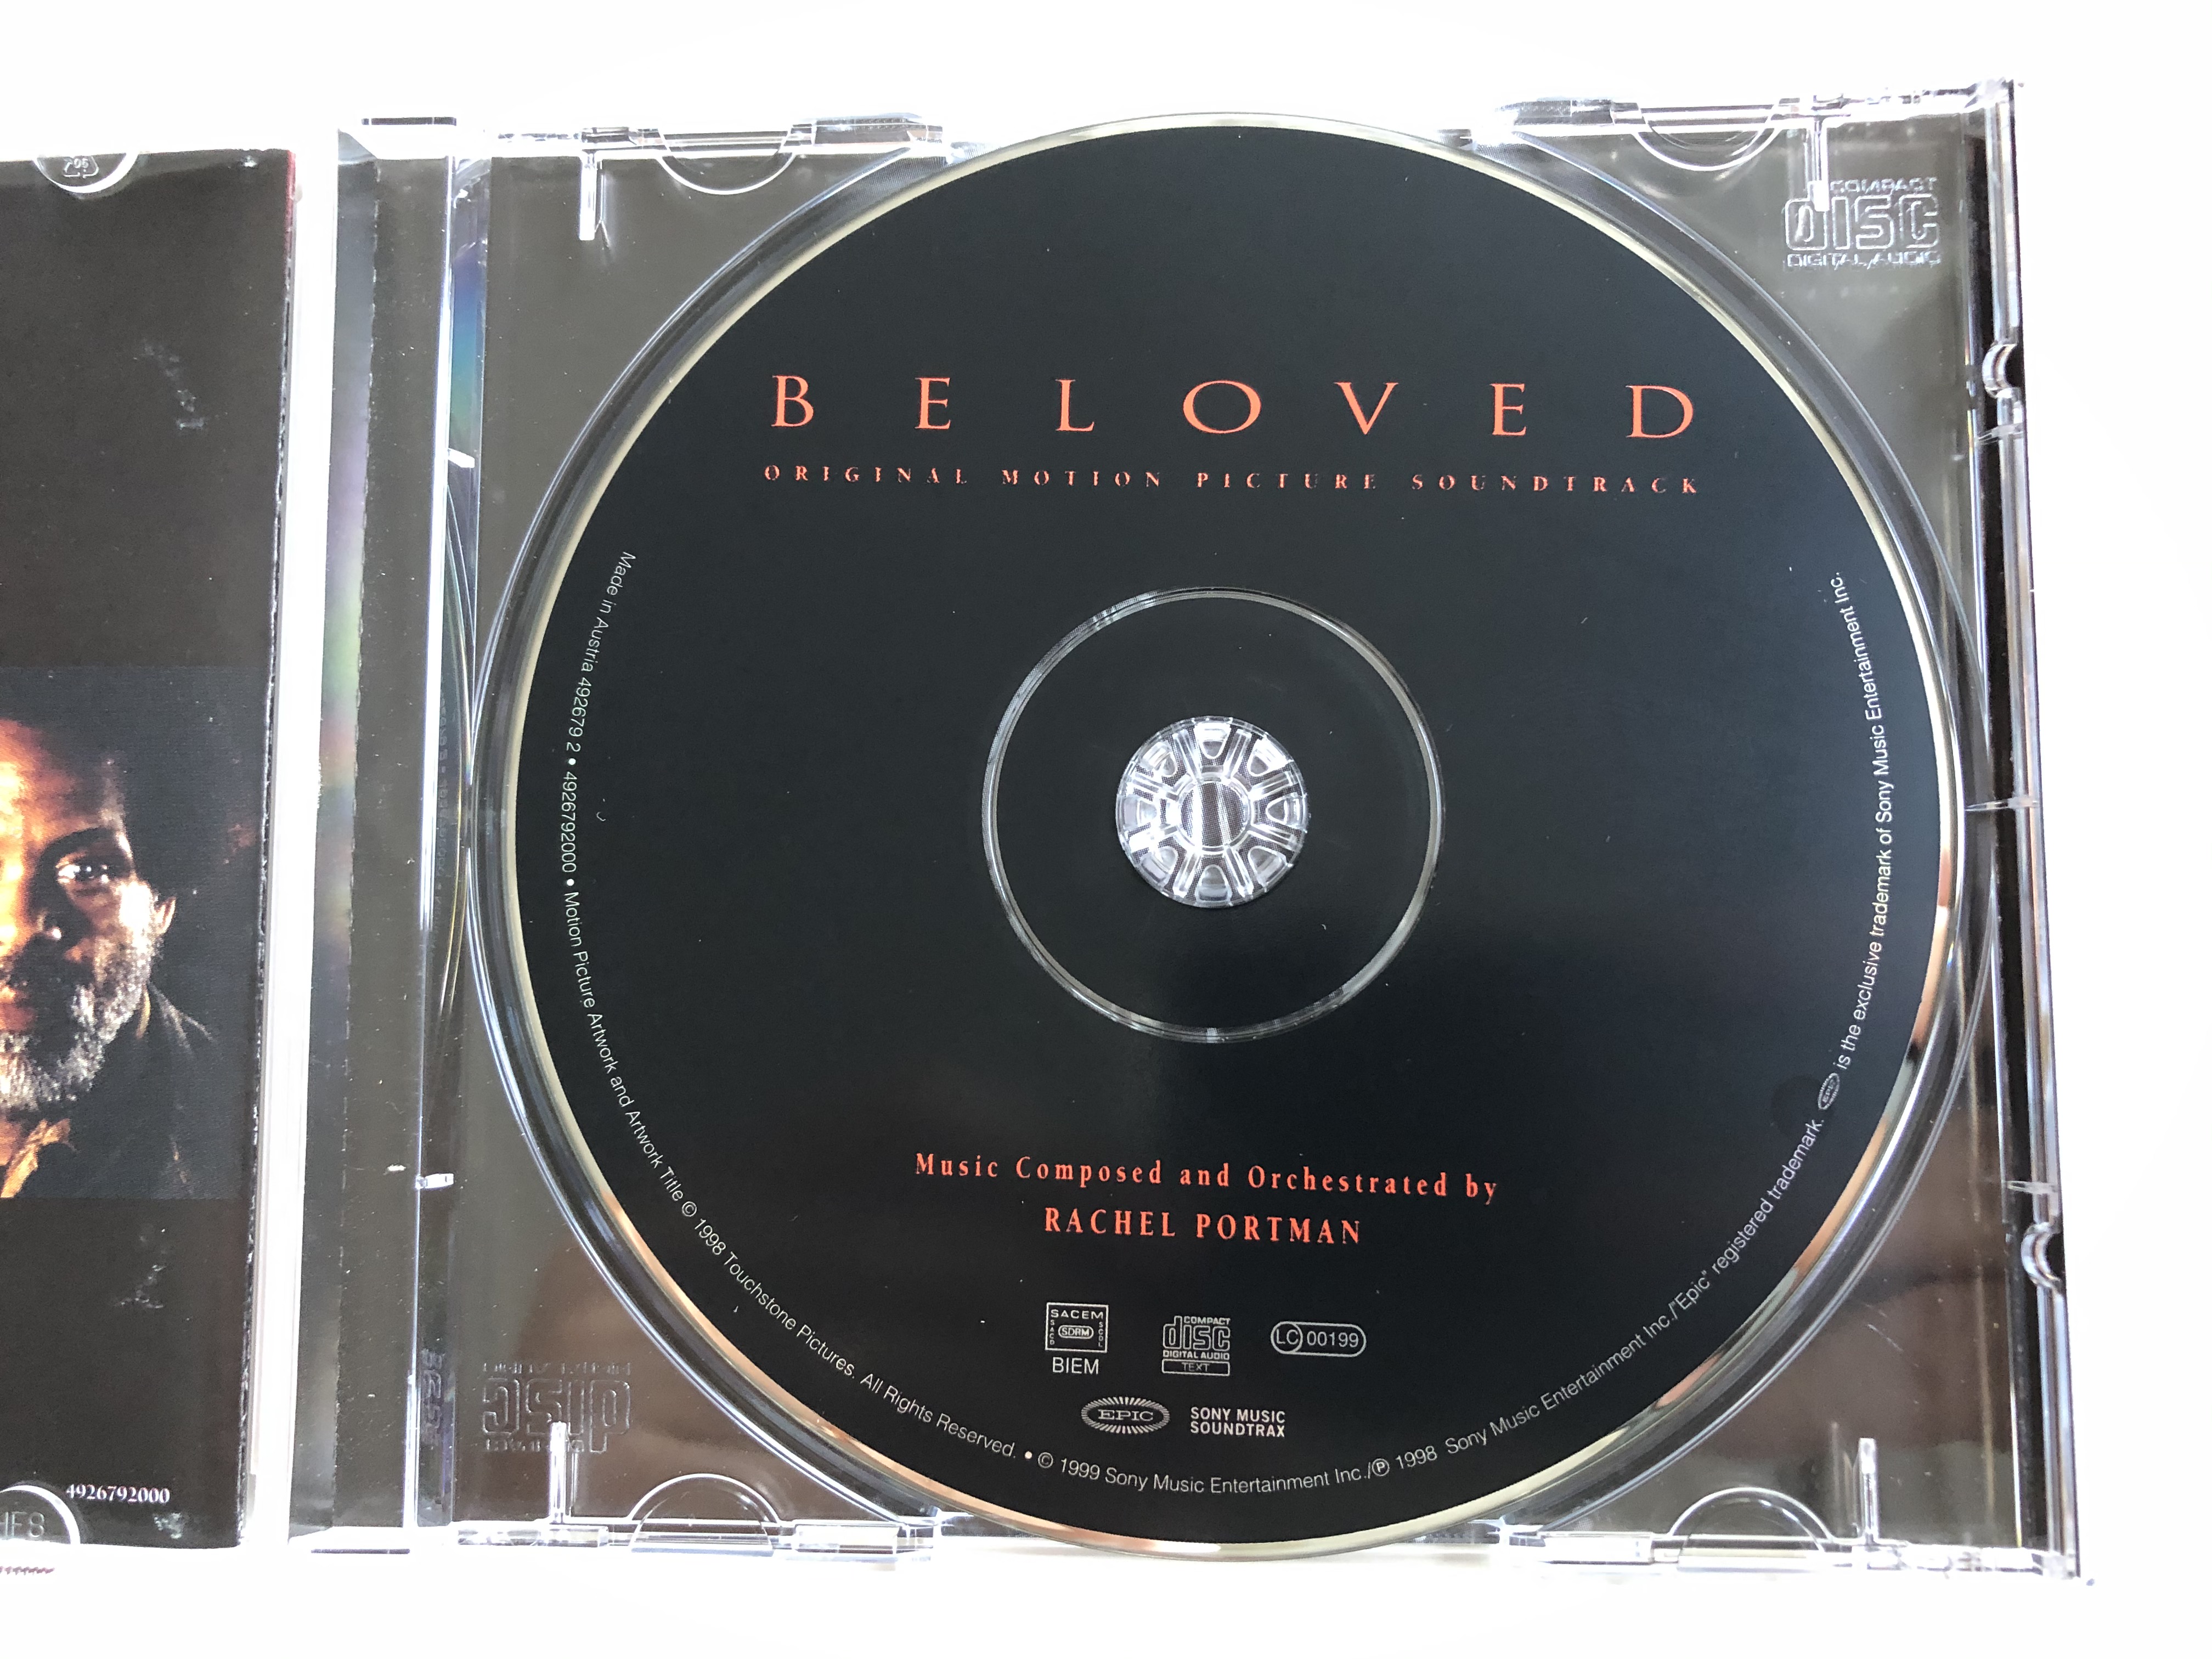 beloved-original-motion-picture-soundtrack-music-composed-and-orchestrated-by-rachel-portman-epic-audio-cd-1999-492679-2-6-.jpg